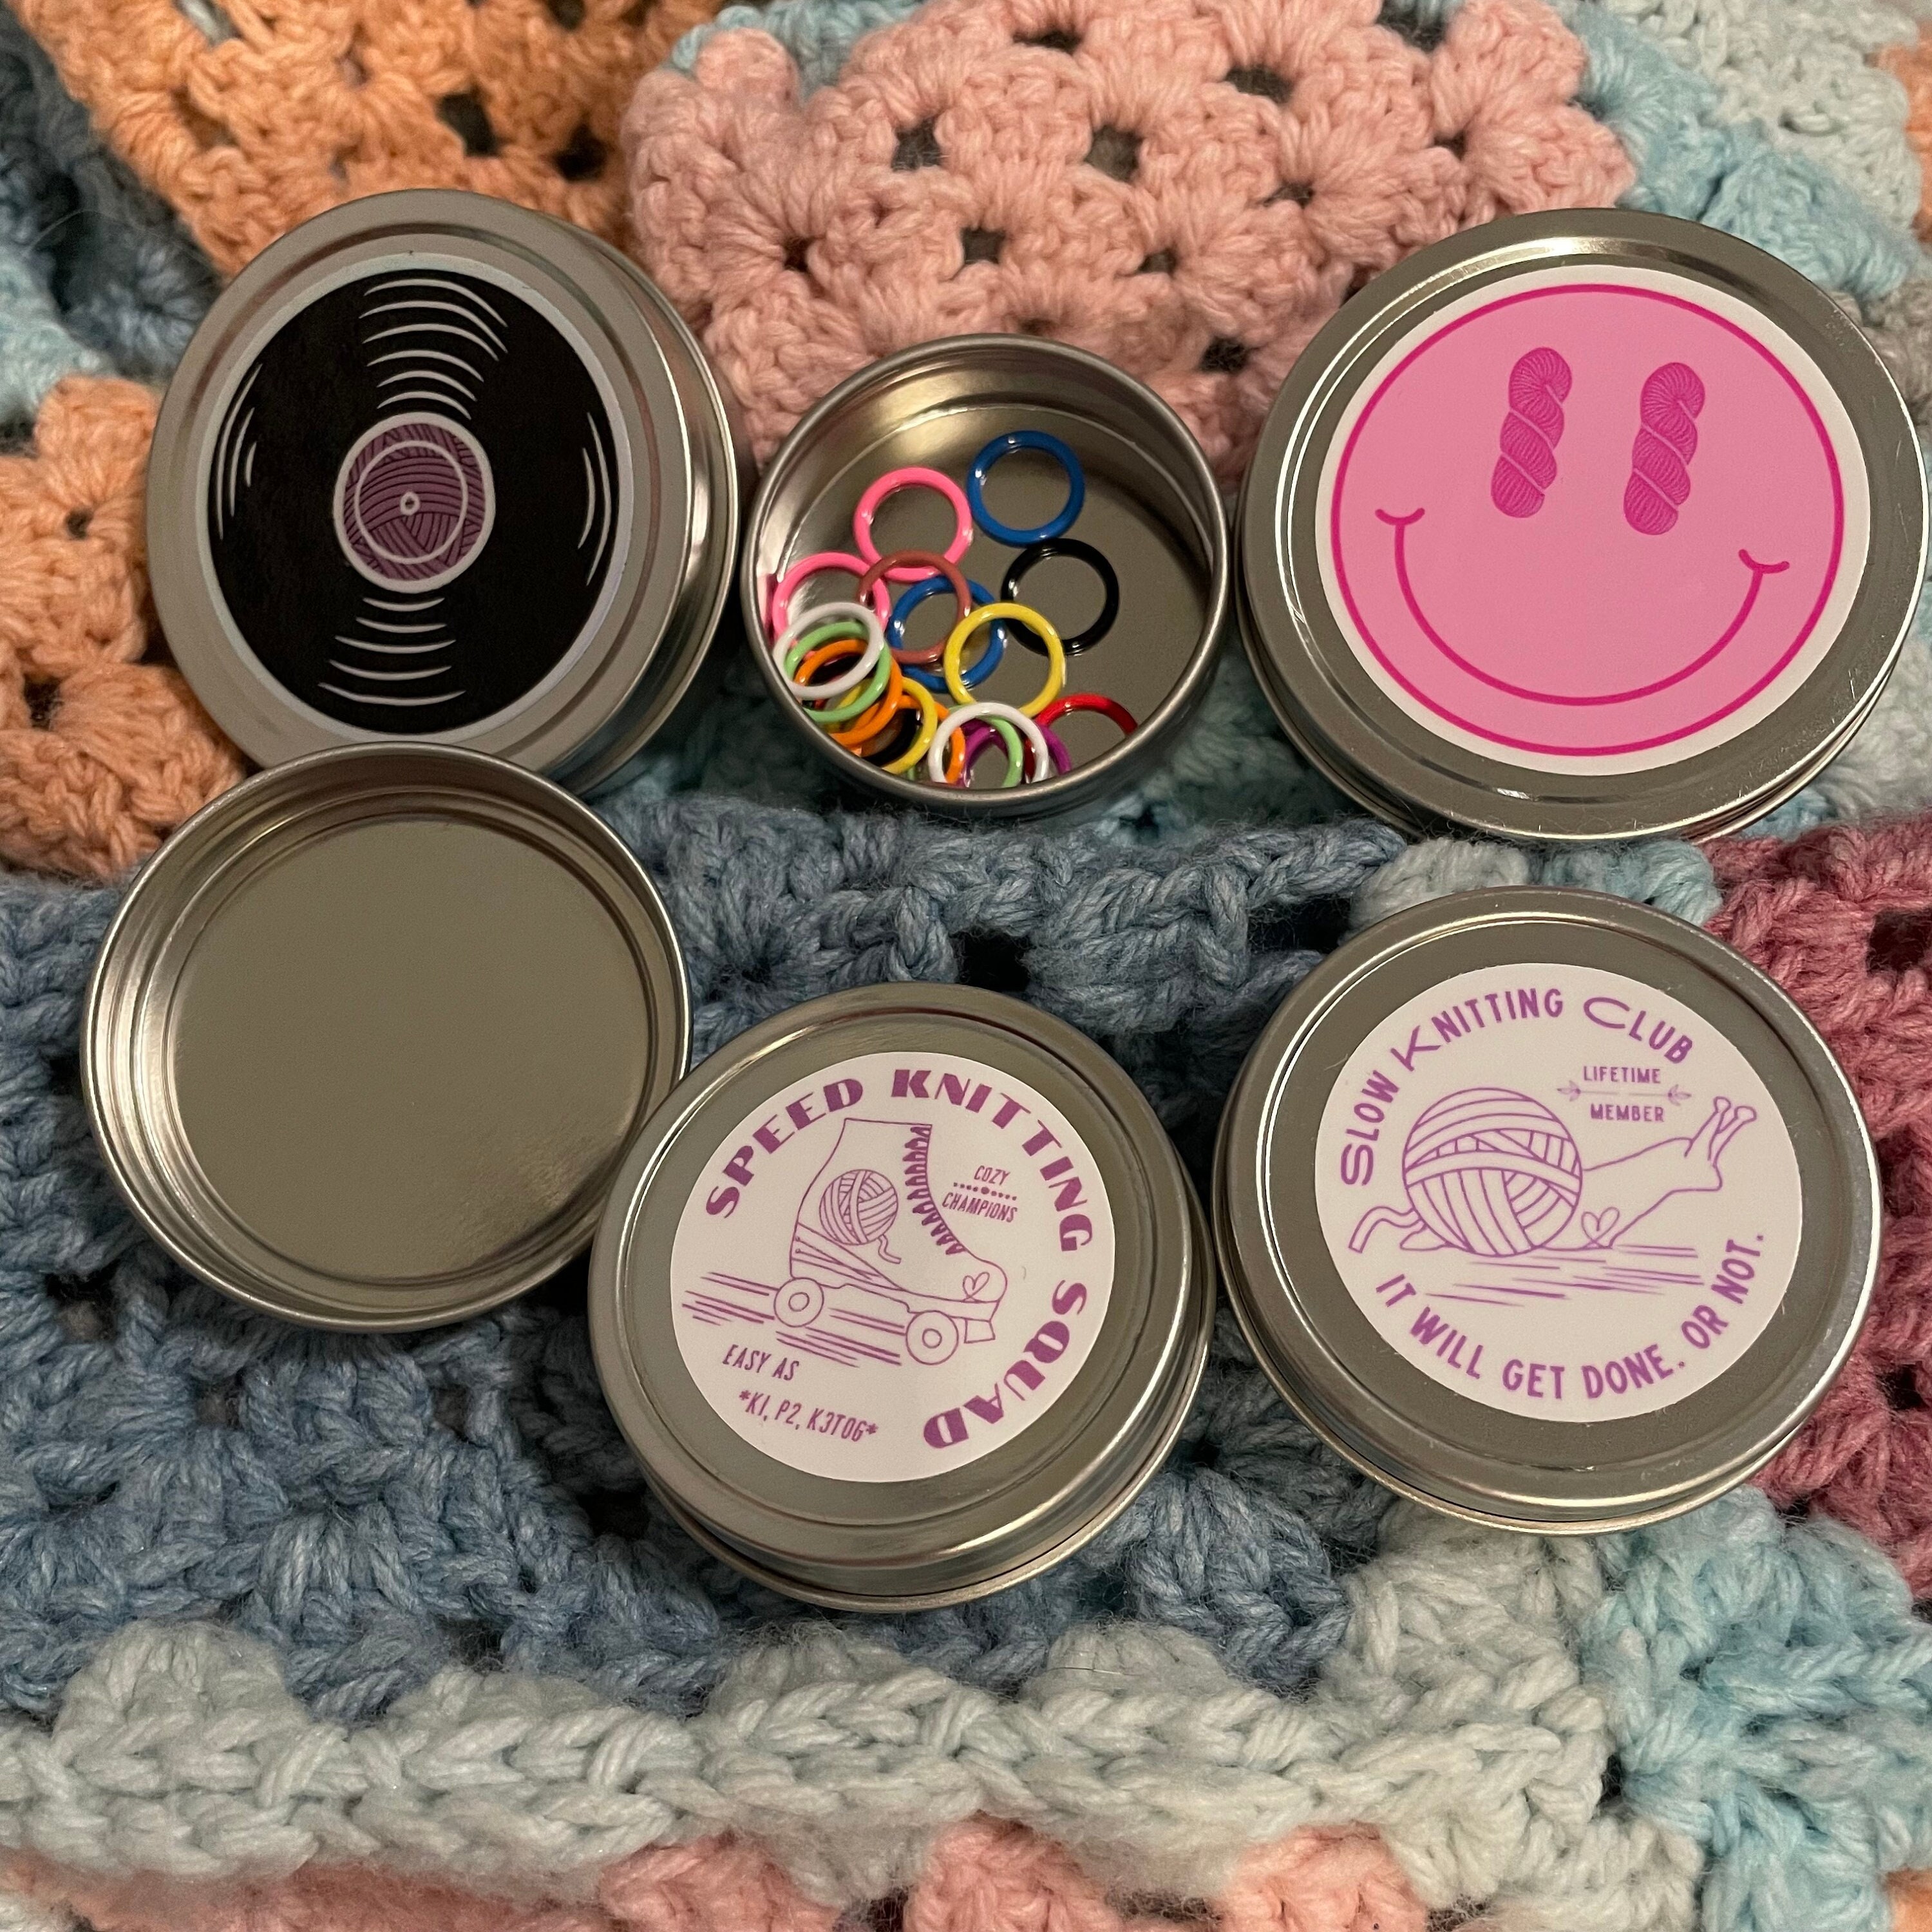 Cute Knitting Notion Tin and Charms for Knitting Gifts for Knitters  Handmade USA